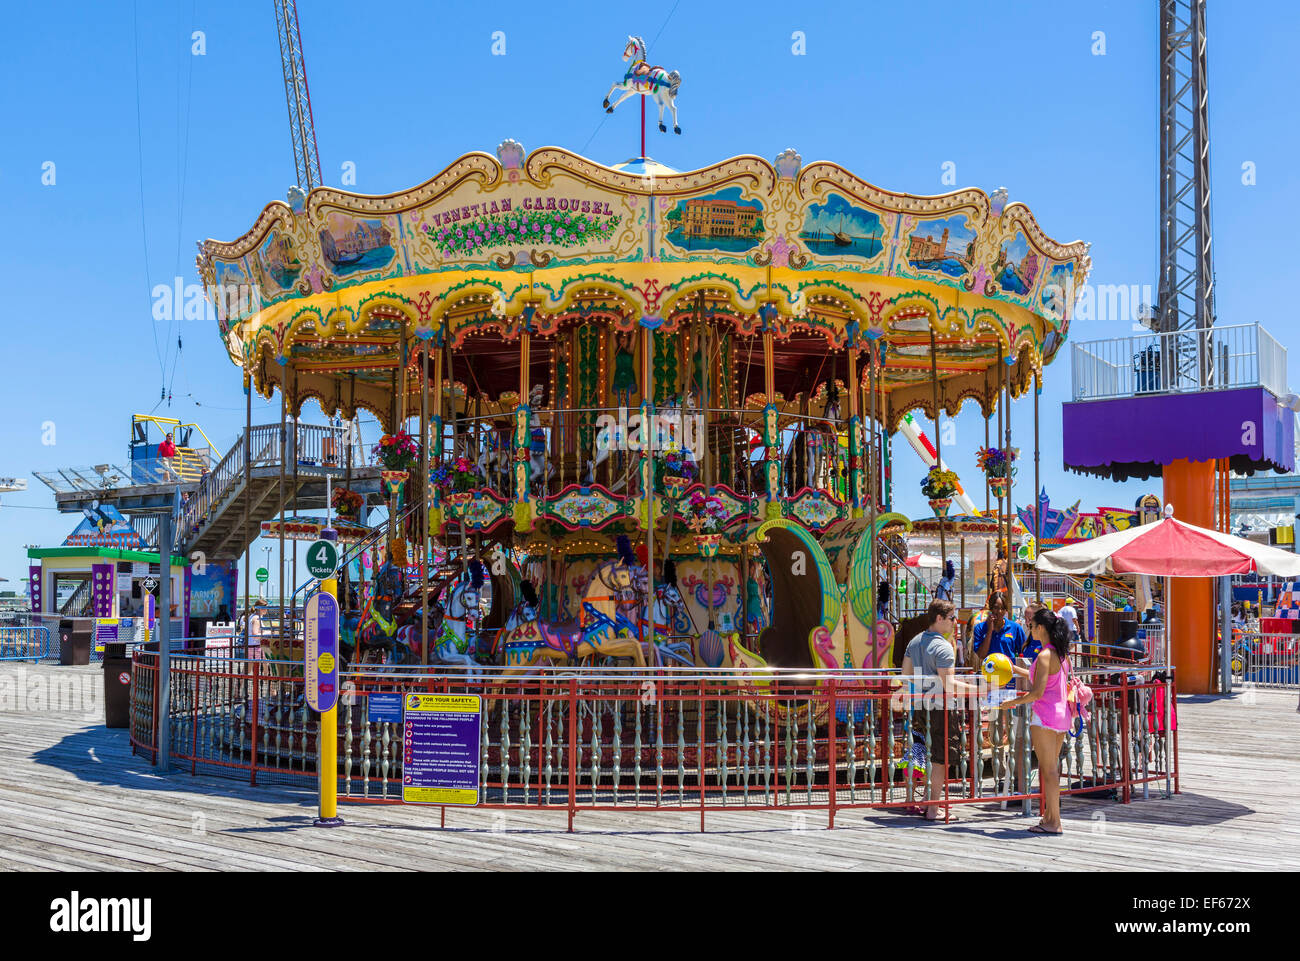 Karussell auf Surfside Pier Nord Wildwood, Cape May County, New Jersey, USA Stockfoto